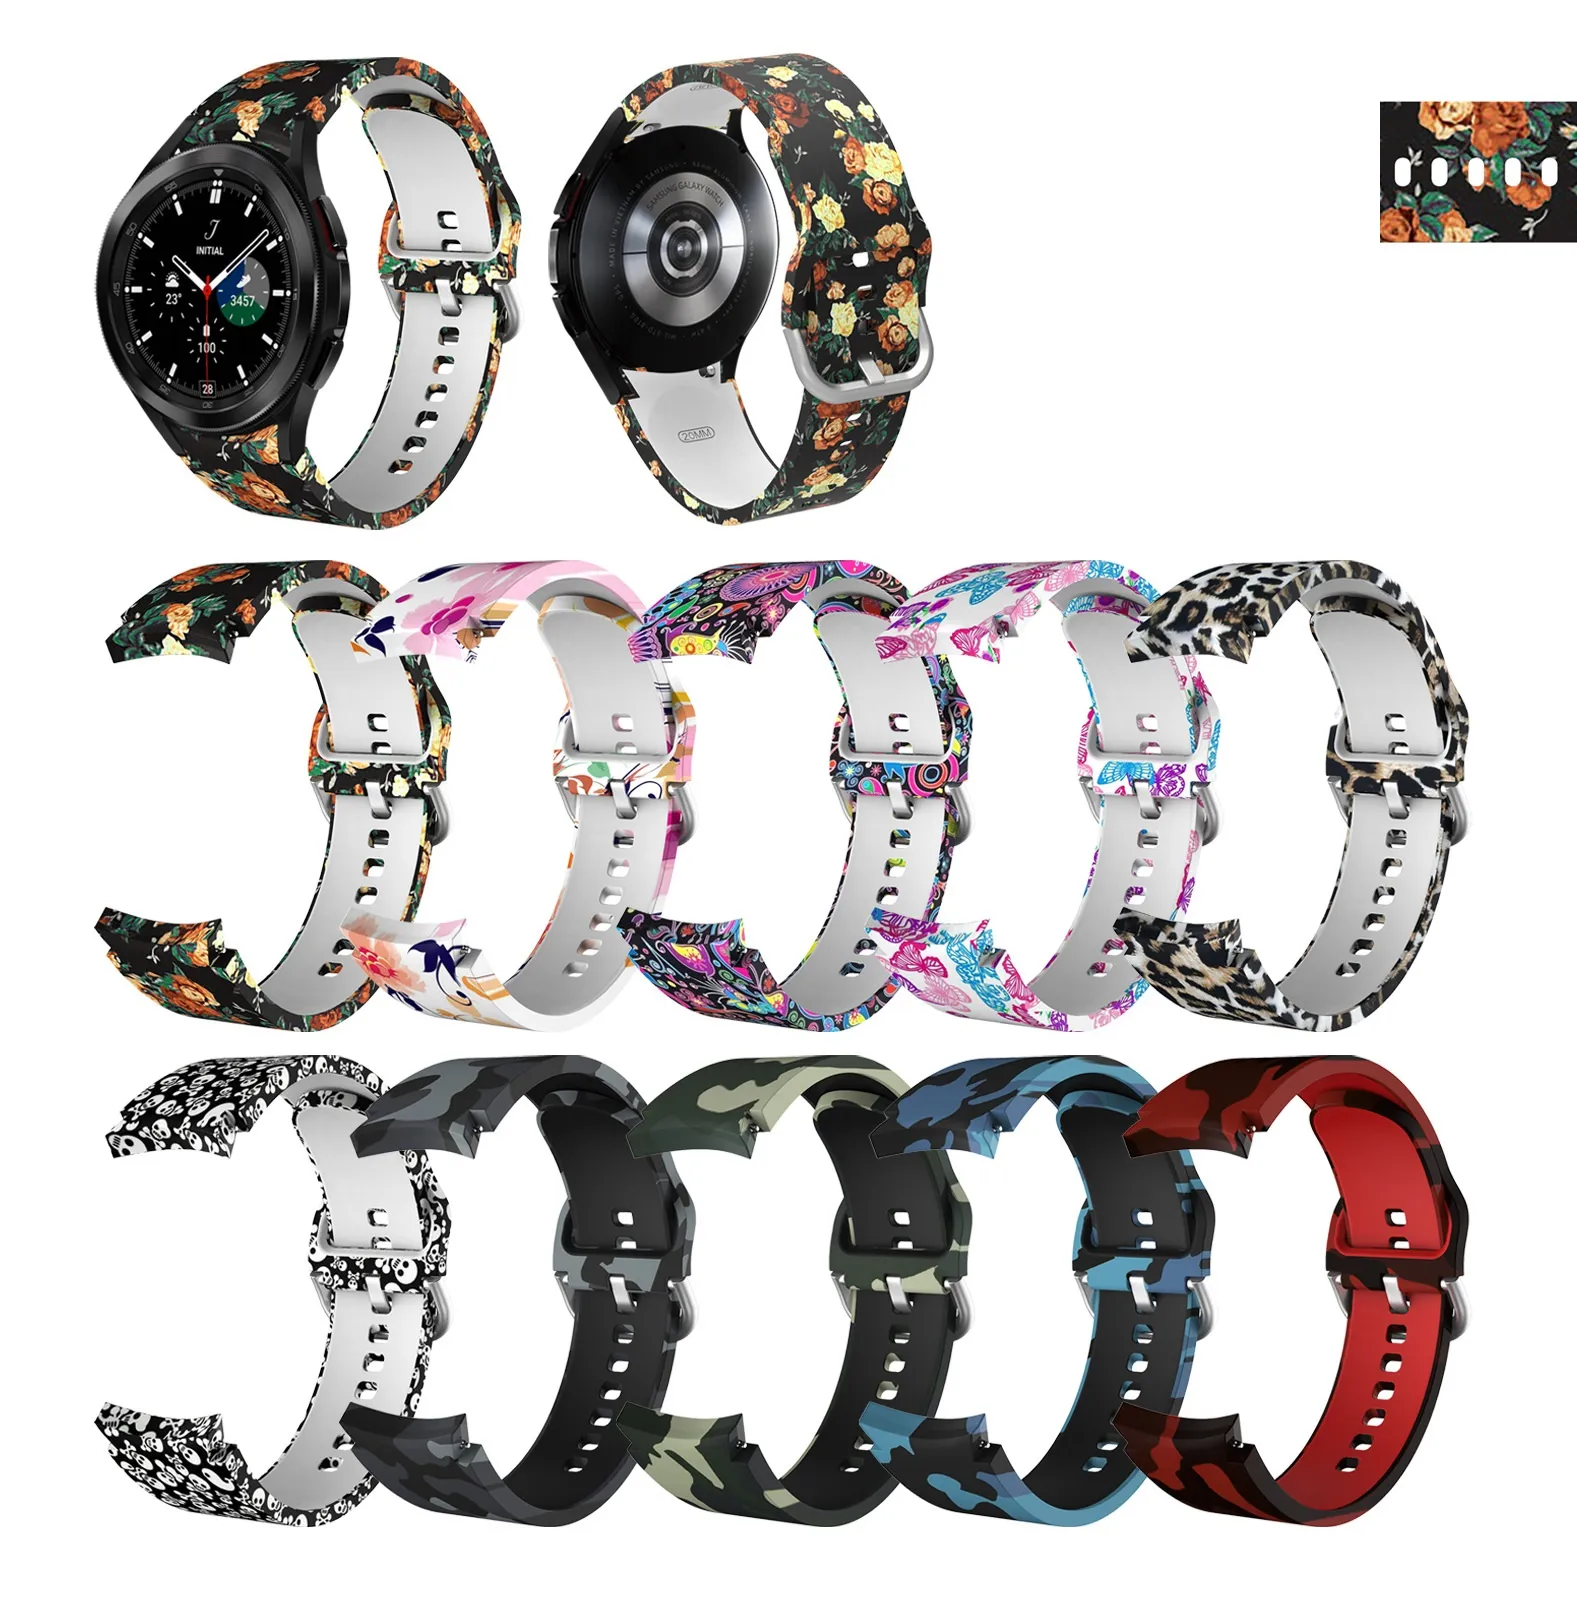 20mm 22mm Floral Print Sport Strap Replacement for Samsung Galaxy Watch 3 4 Active 42mm 46mm Gear Sport fashion classic Bracelet Bands Straps